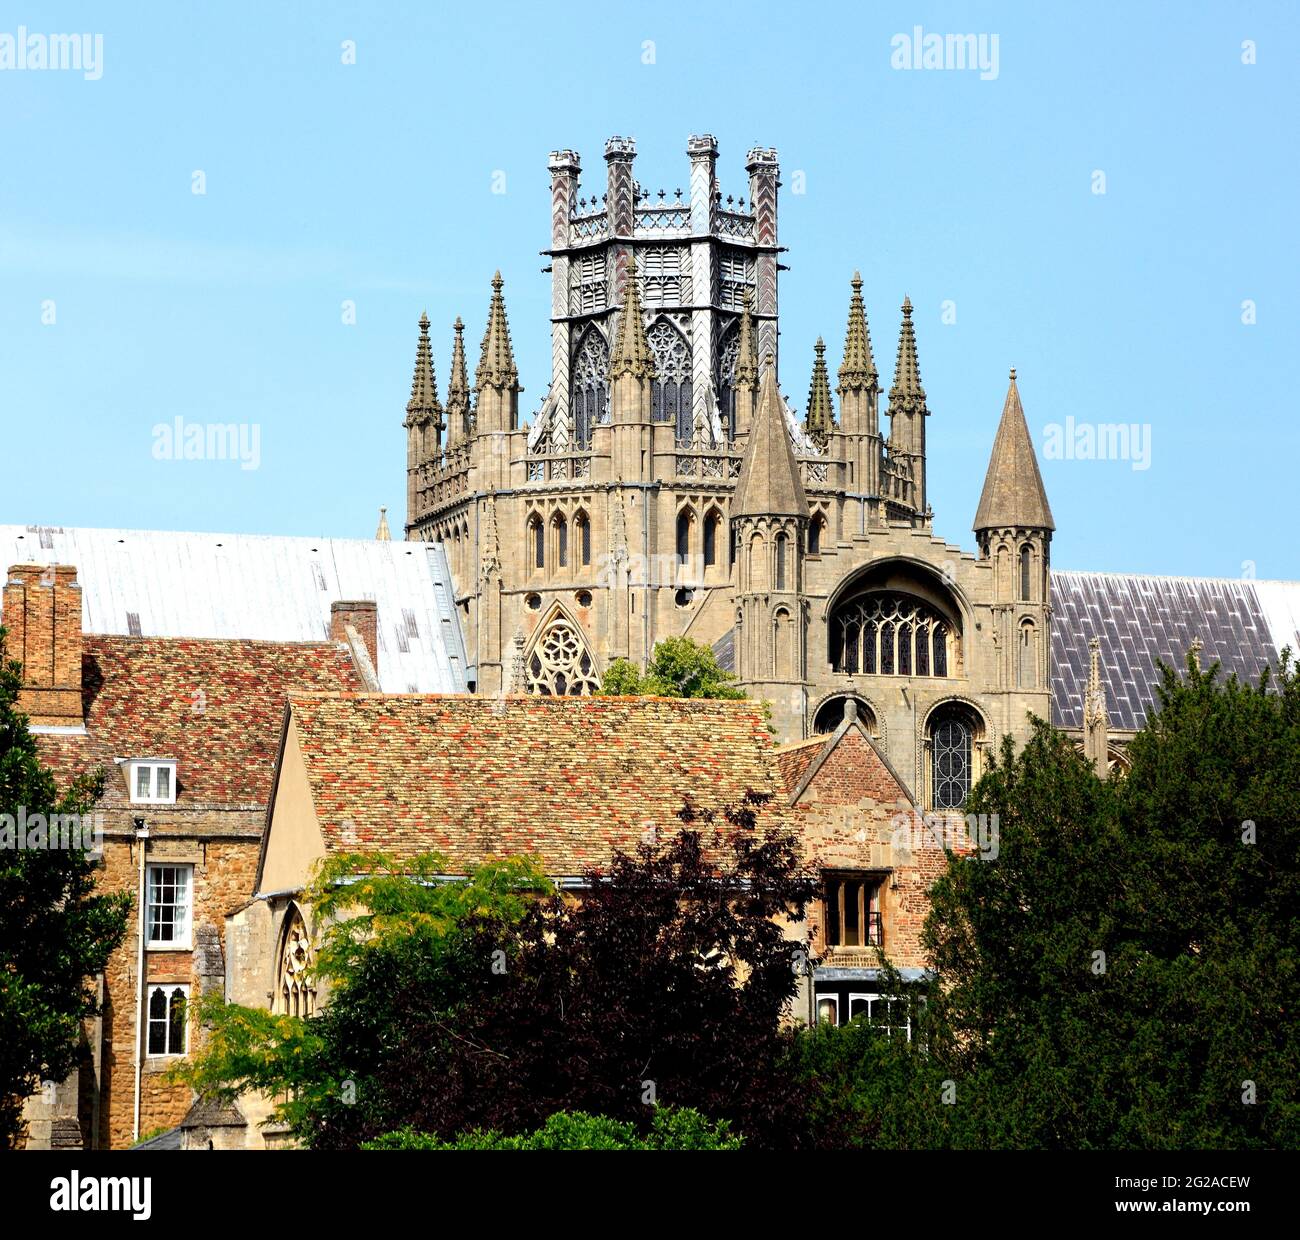 Ely Cathedral, Octagon and Lantern towers, Cambridgeshire, medieval, architecture, England, UK Stock Photo